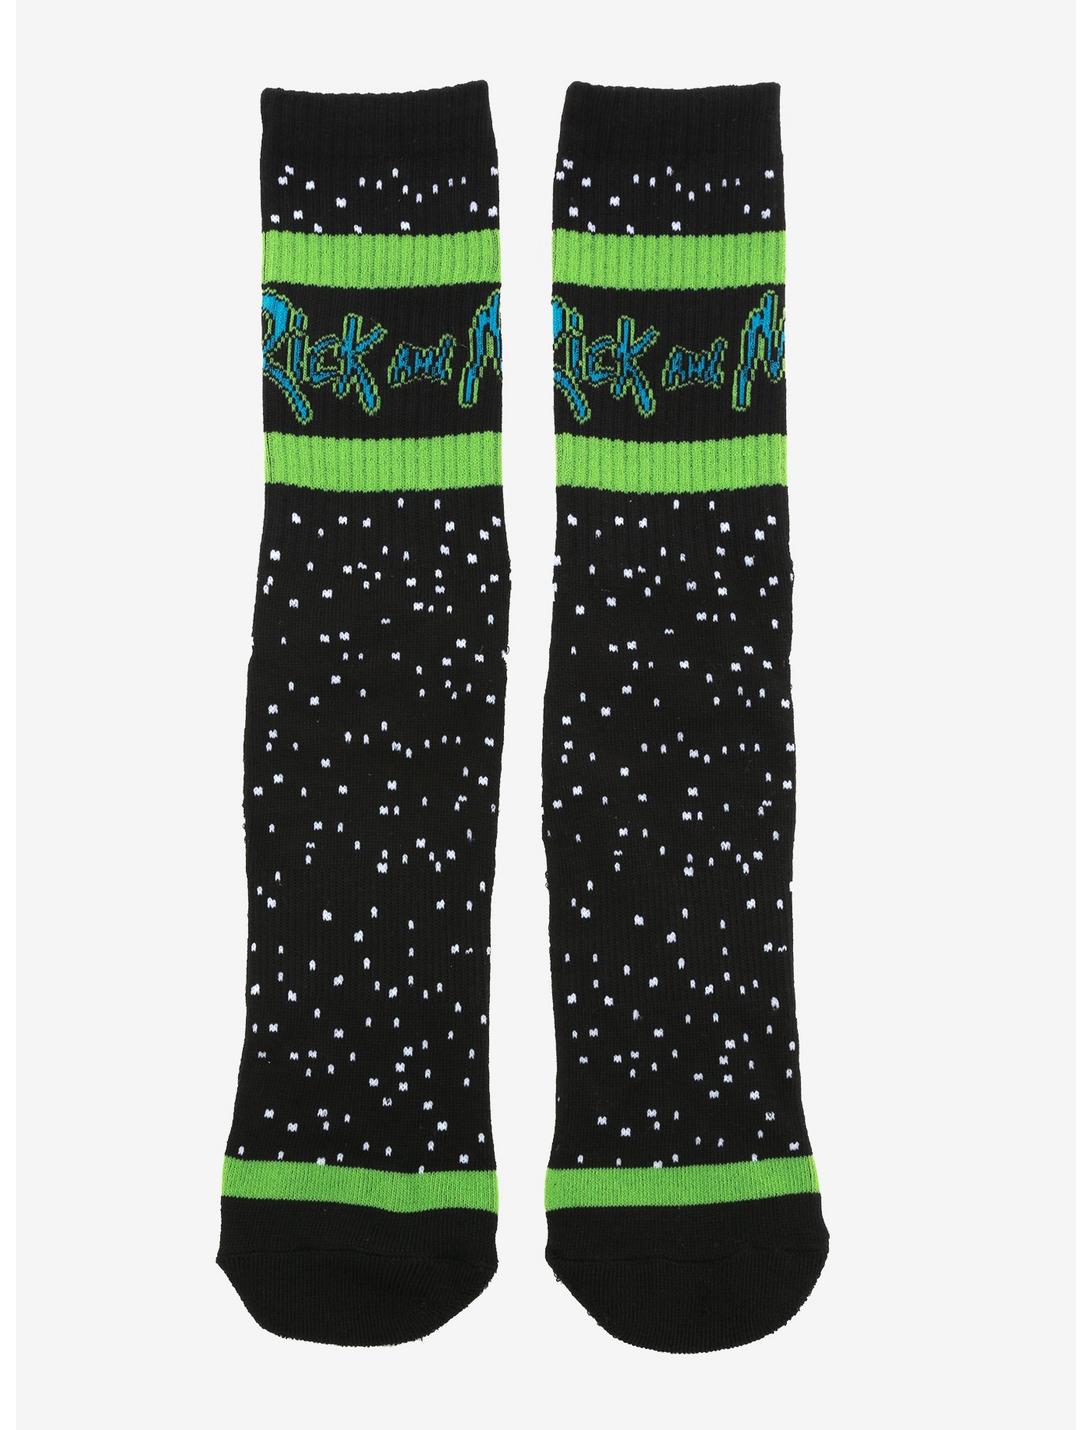 Rick and Morty Title Crew Socks - BoxLunch Exclusive, , hi-res